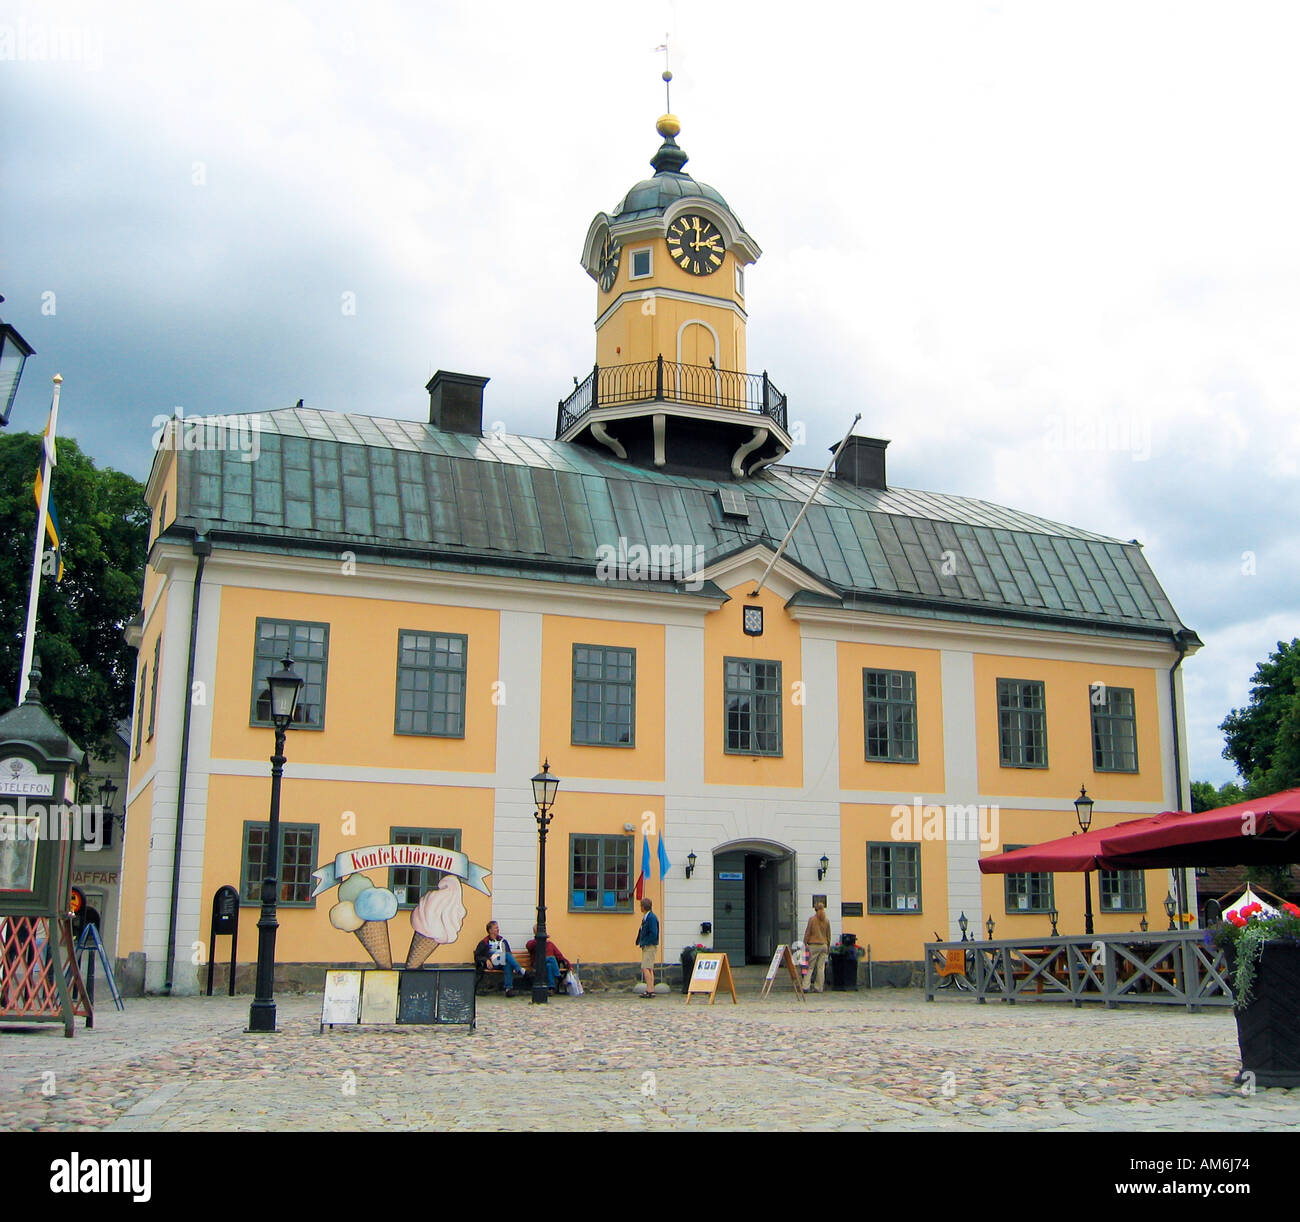 The wooden town hall house and clock tower at Rådhustorget square in idyllic Söderköping Sweden Stock Photo